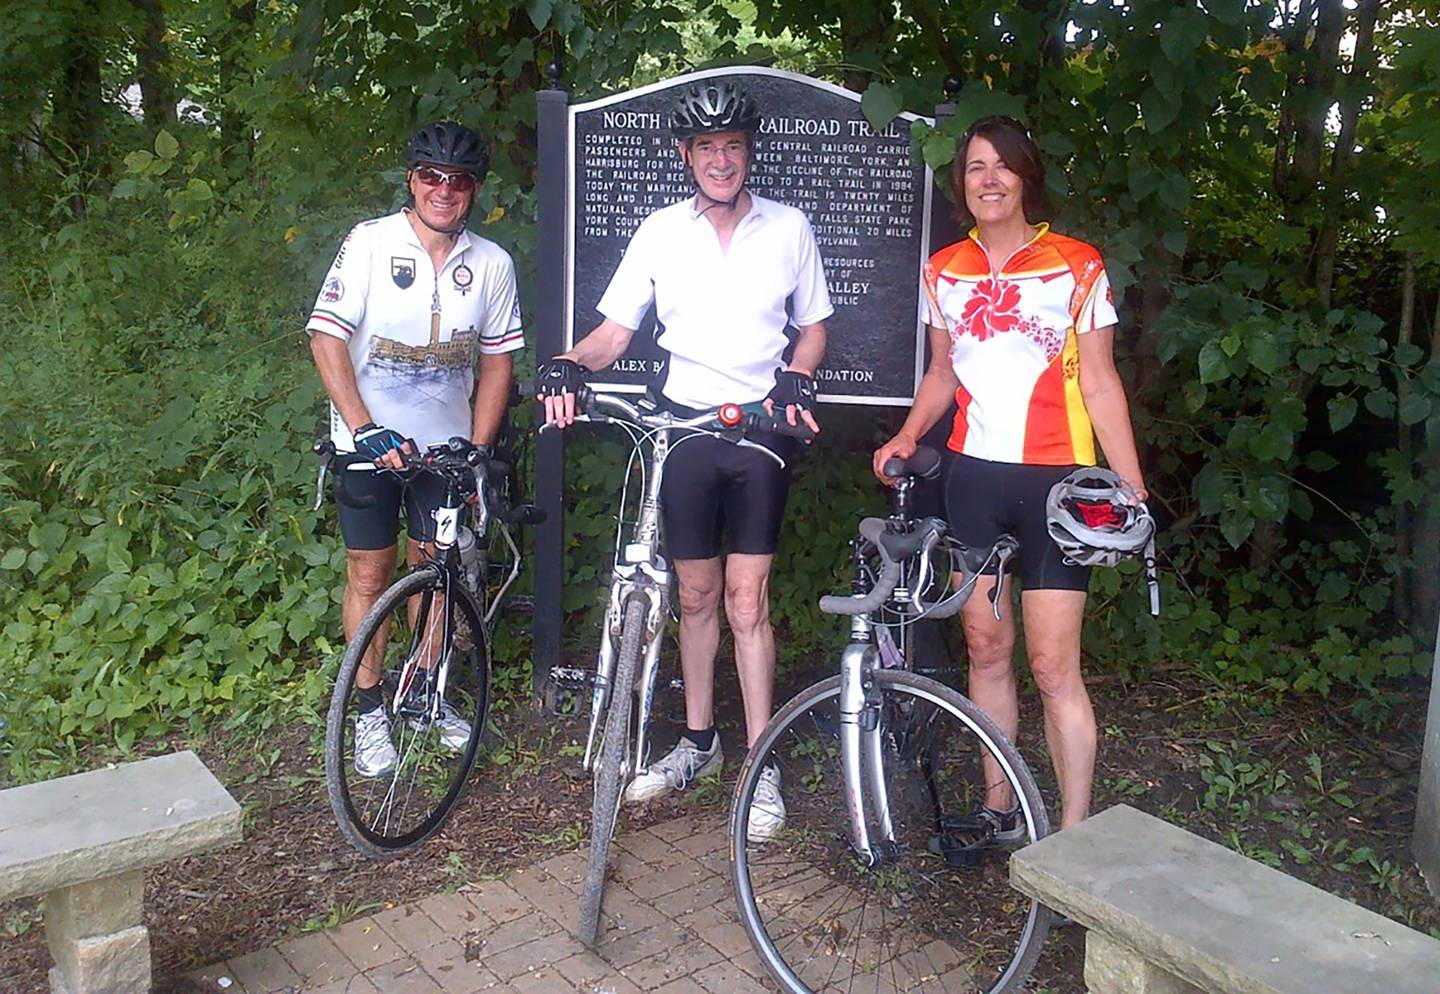 2014 photo of Brian Frosh, center, is pictured with Vincent DeMarco, left, and DeMarco’s wife, Molly Mitchell, during a bike ride on the Northern Central Railroad Trail.